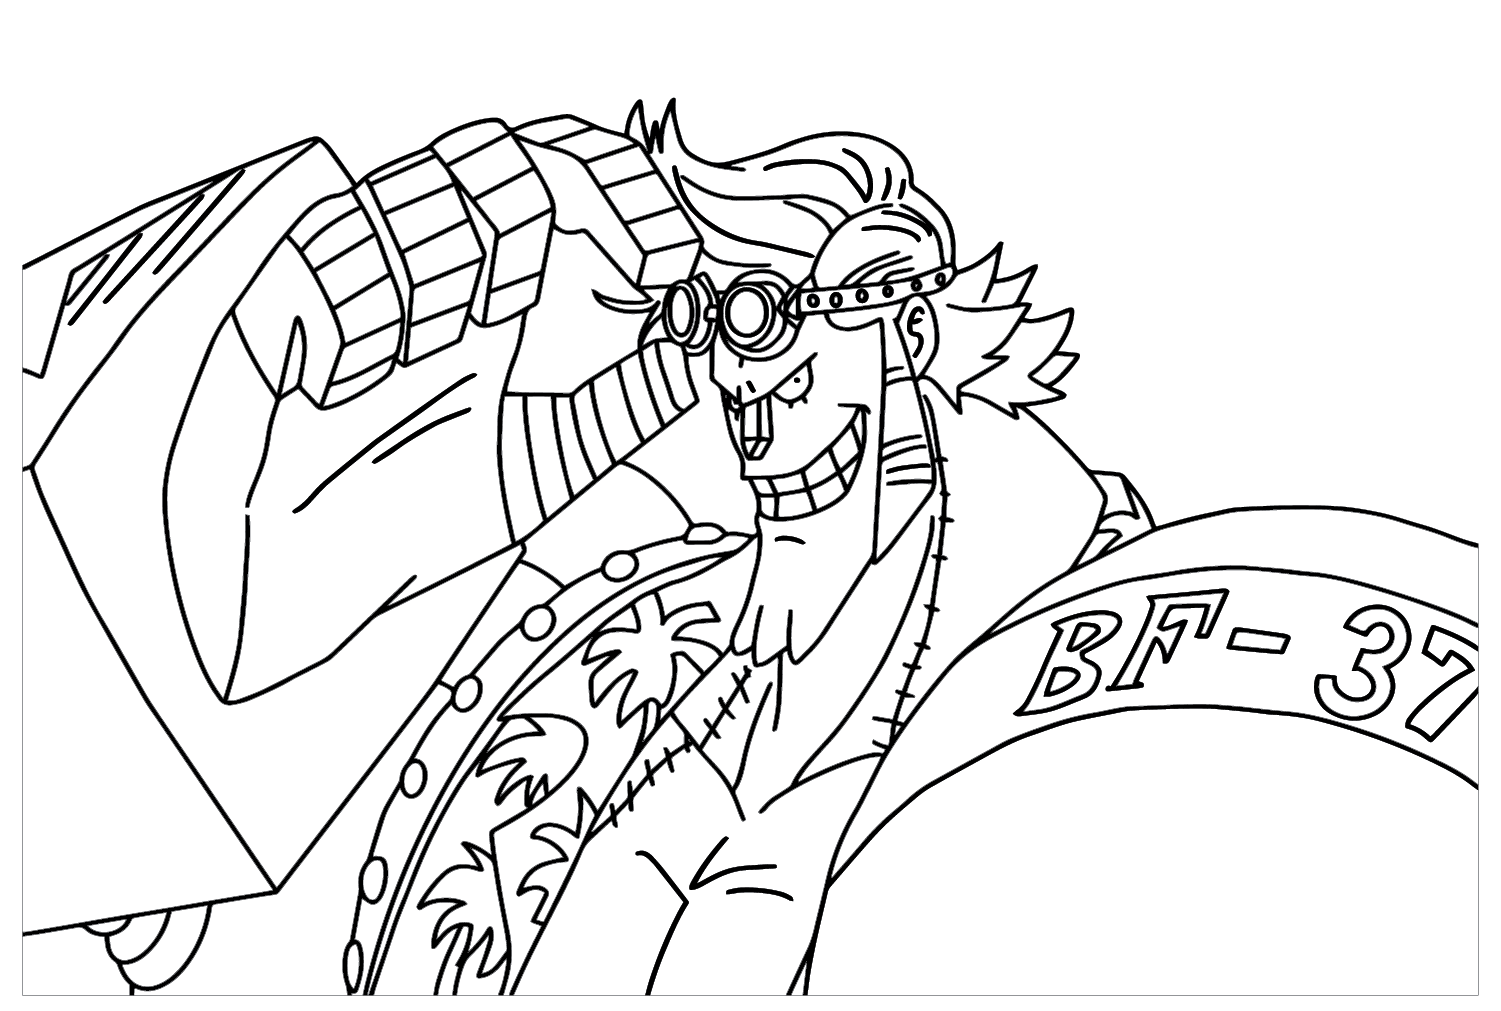 Drawing Franky Coloring Page from Franky